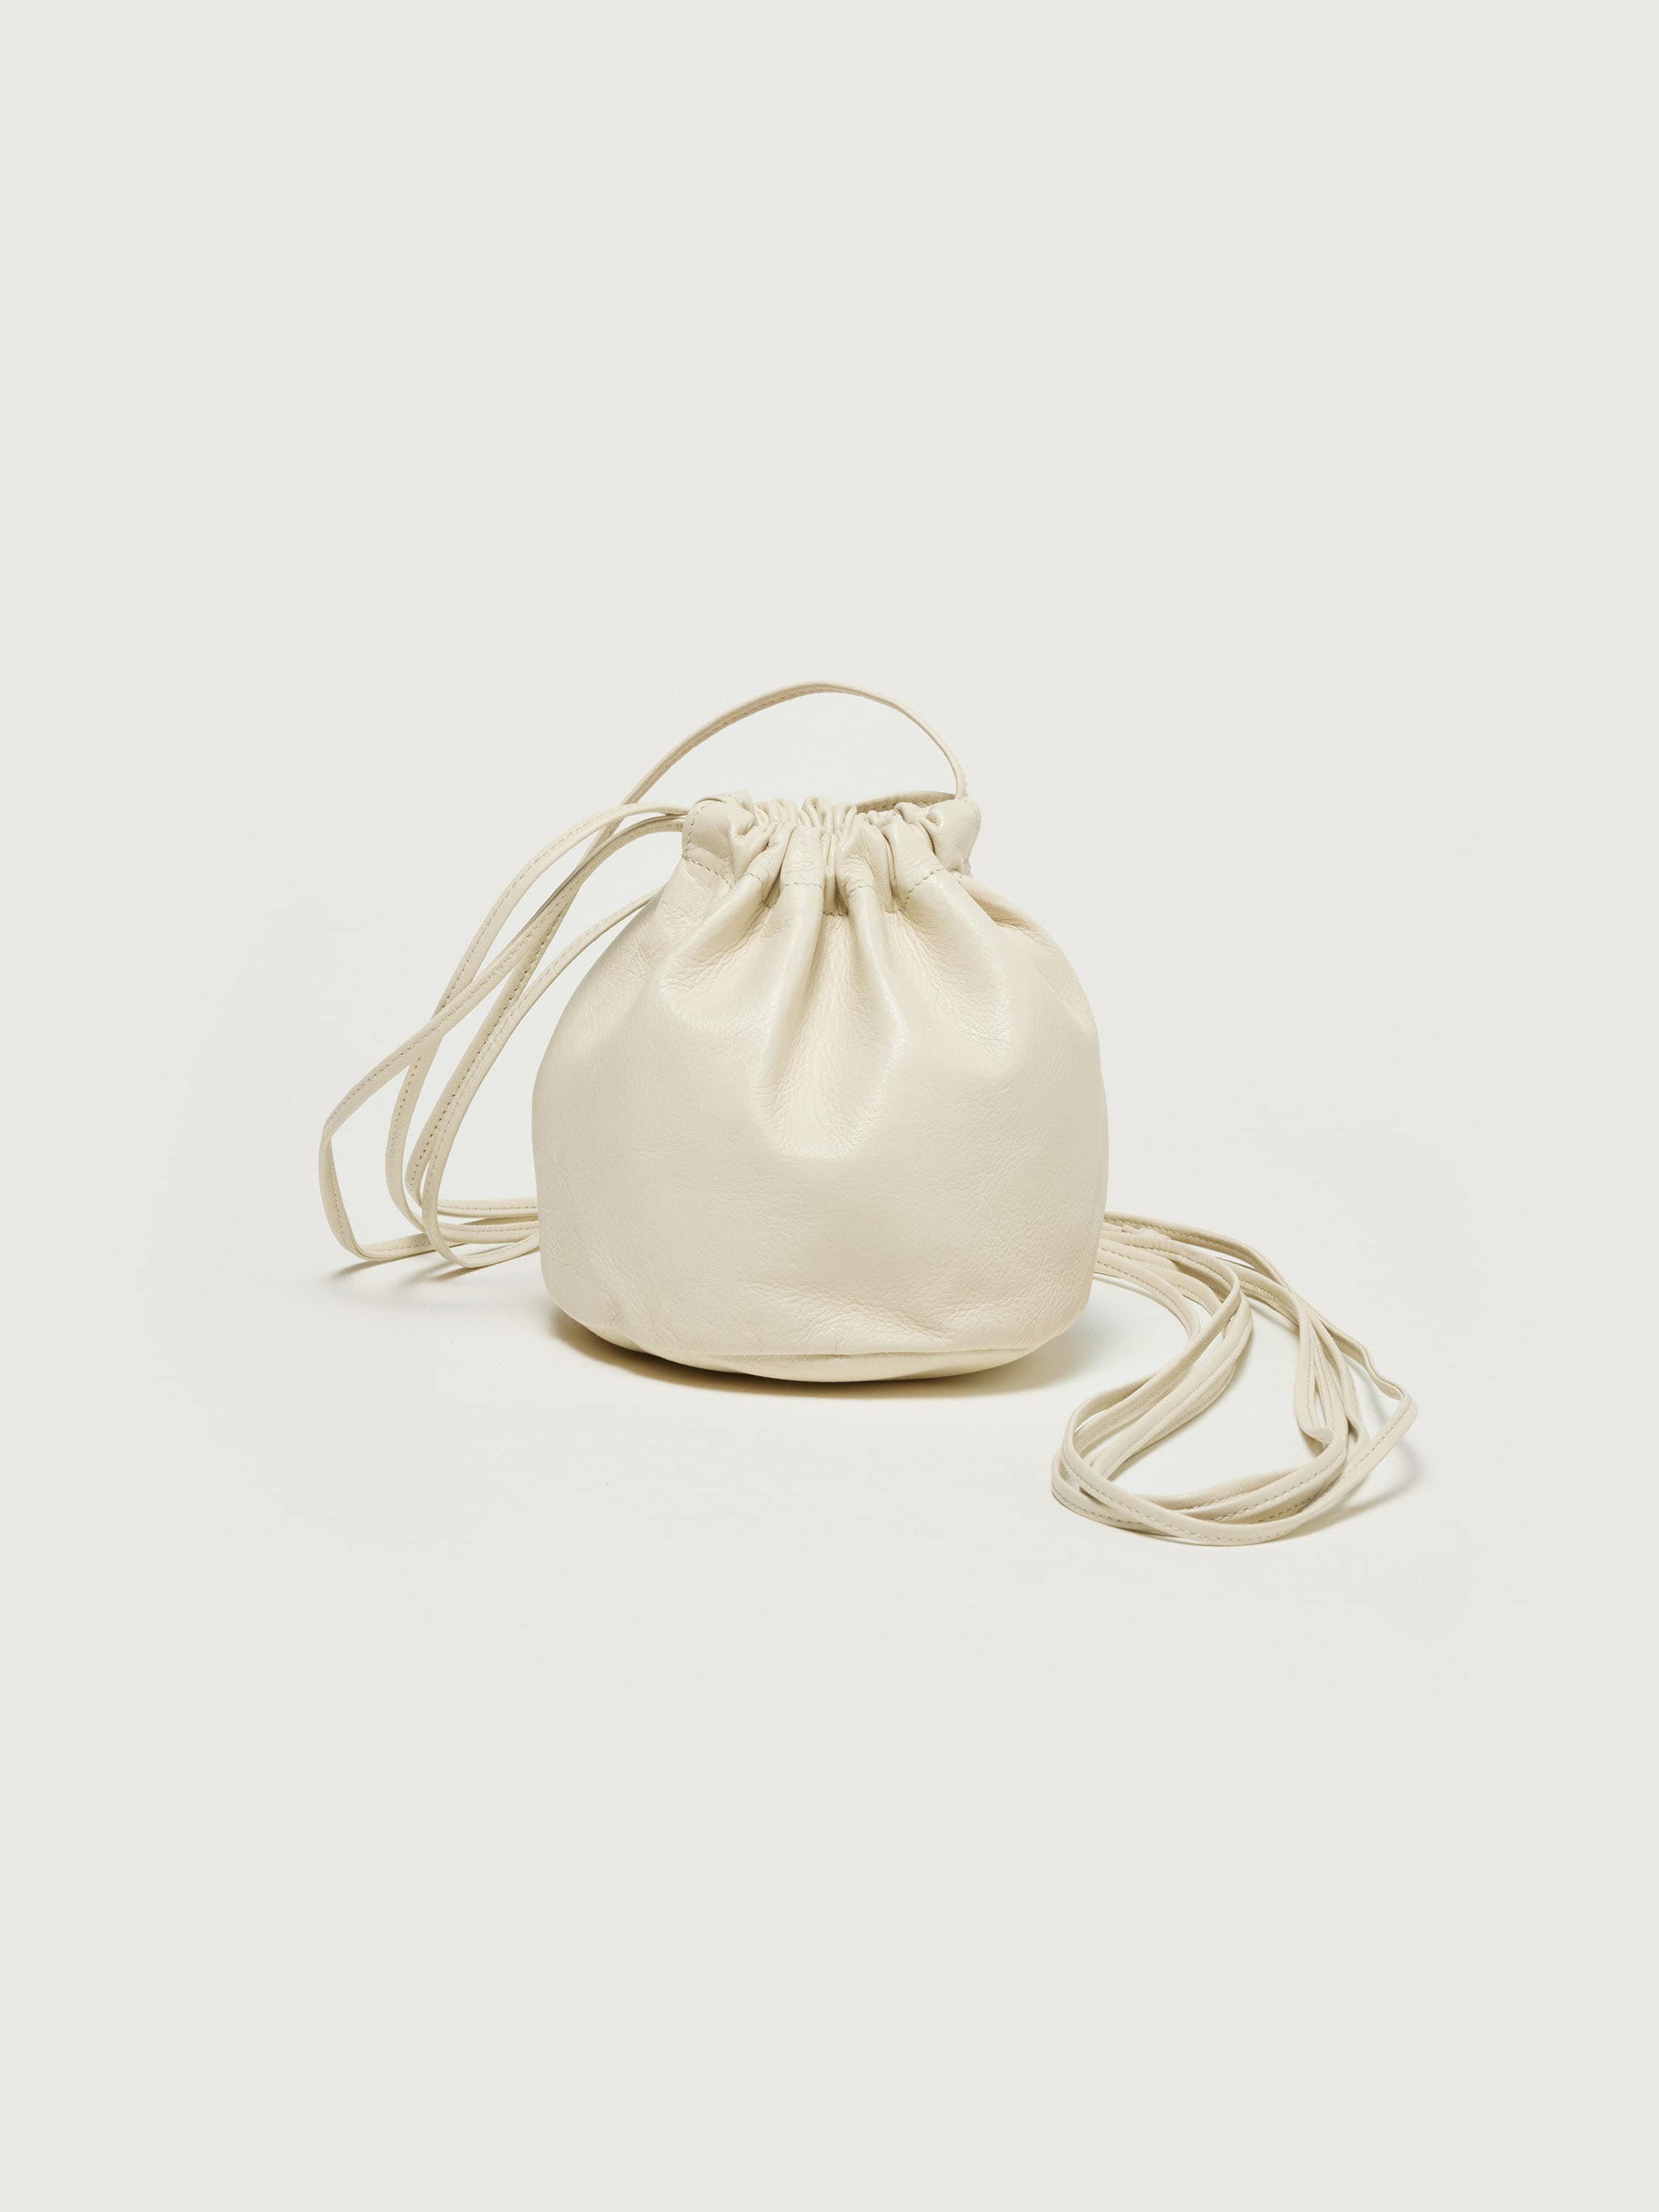 LEATHER SMALL ROUND STRING POUCH 詳細画像 IVORY 1